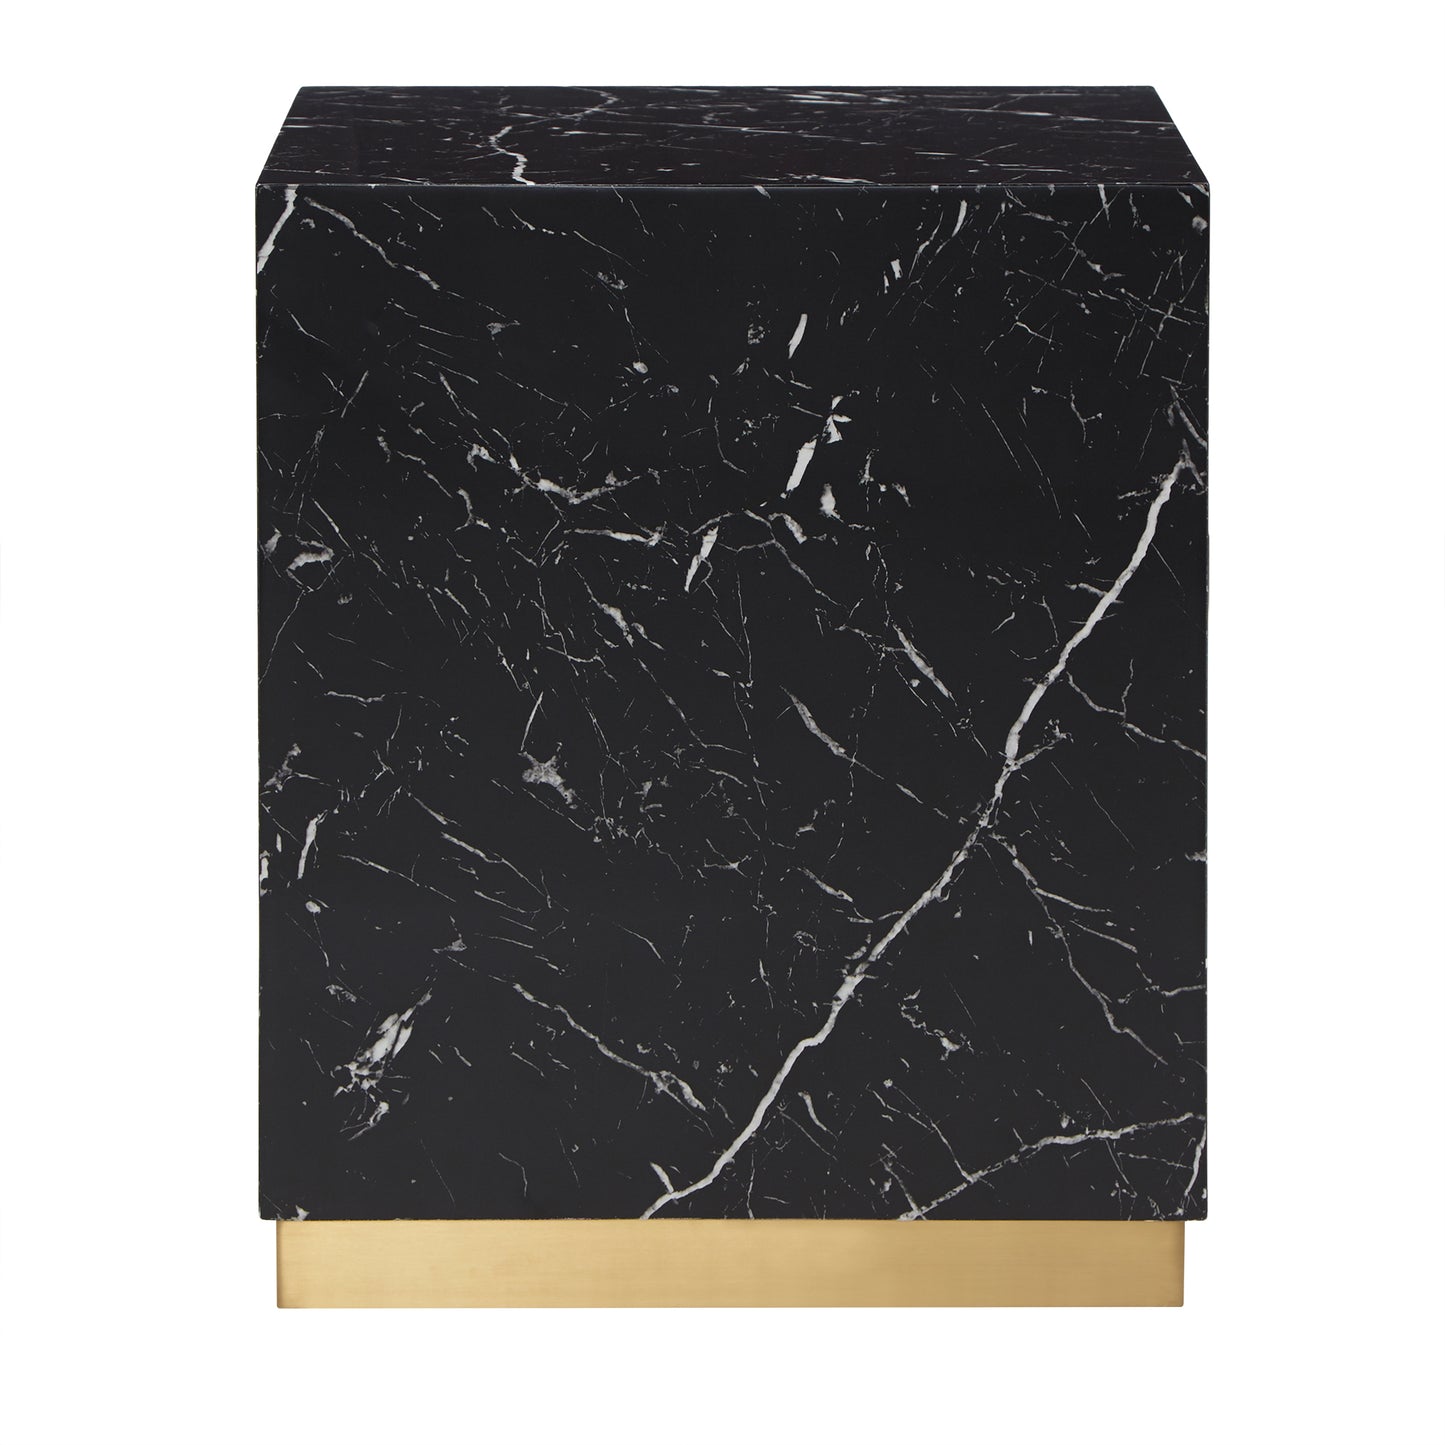 Faux Marble End Table with Casters - Black, Square